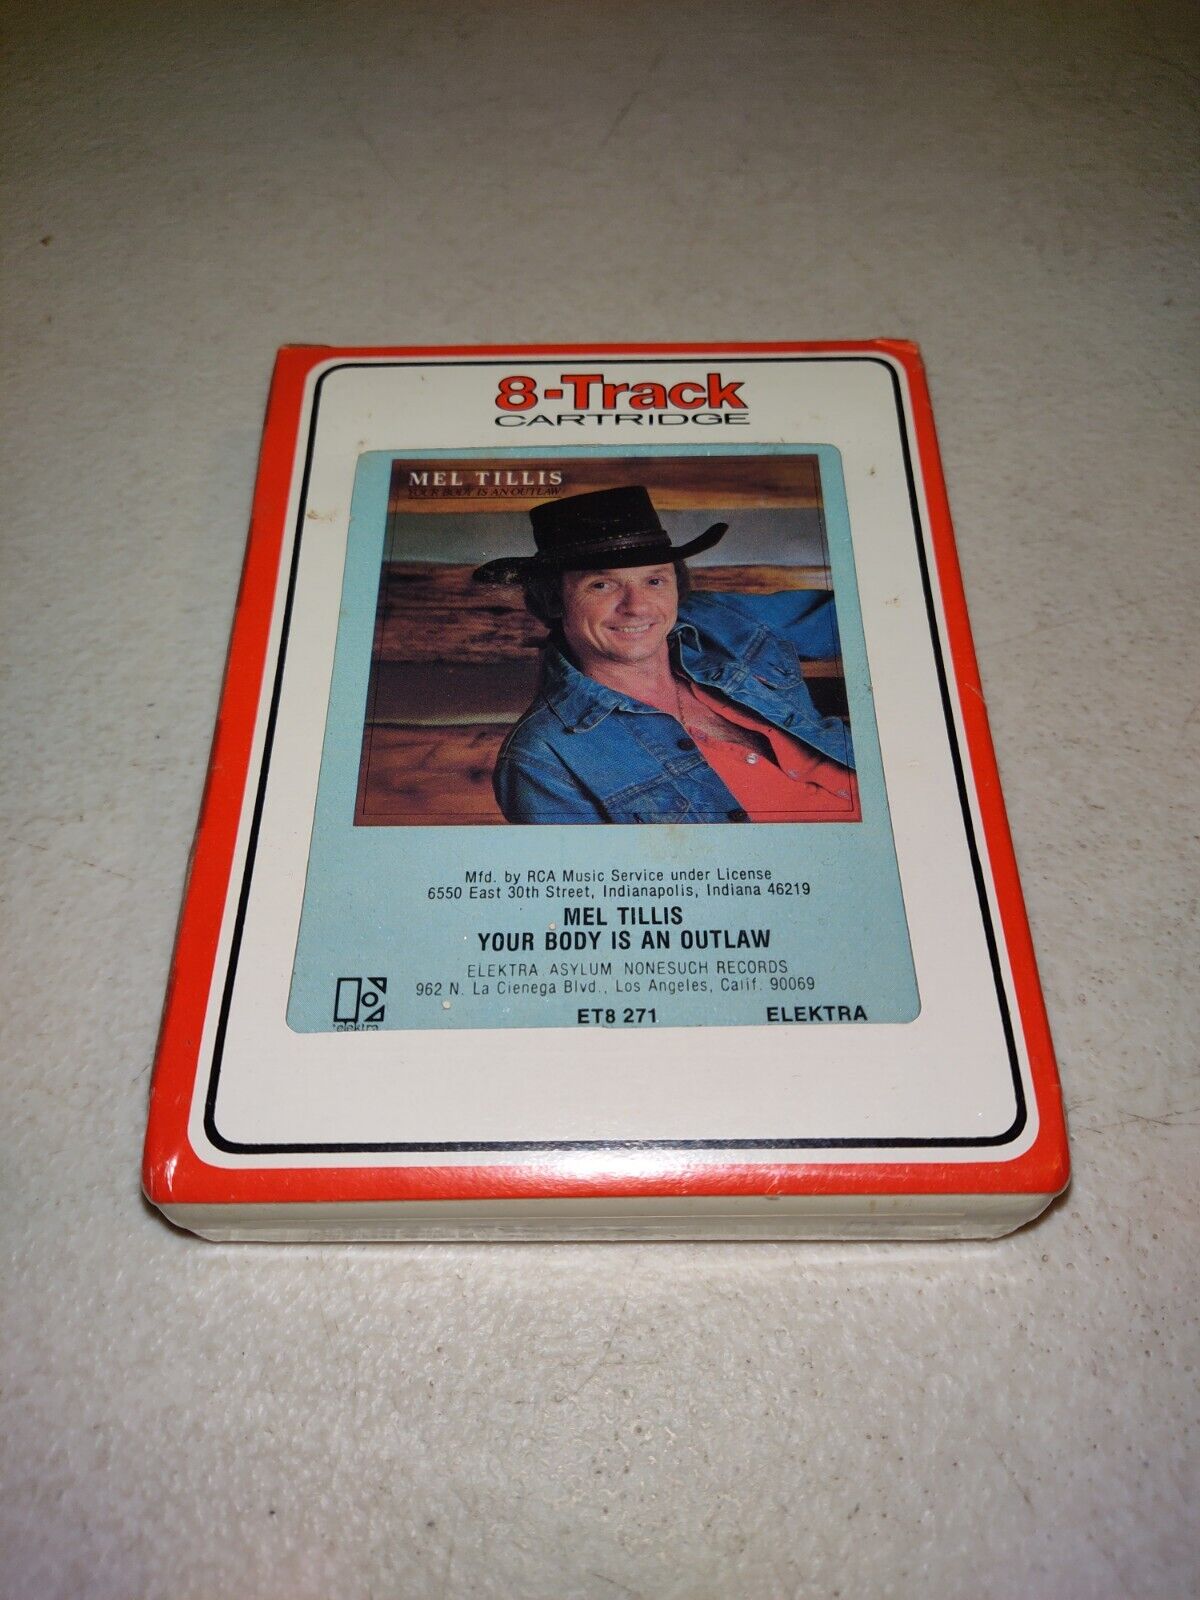 ✅ 1980 MEL TILLIS Your Body Is An Outlaw 8 Track Cartridge Tape NEW ET8 271